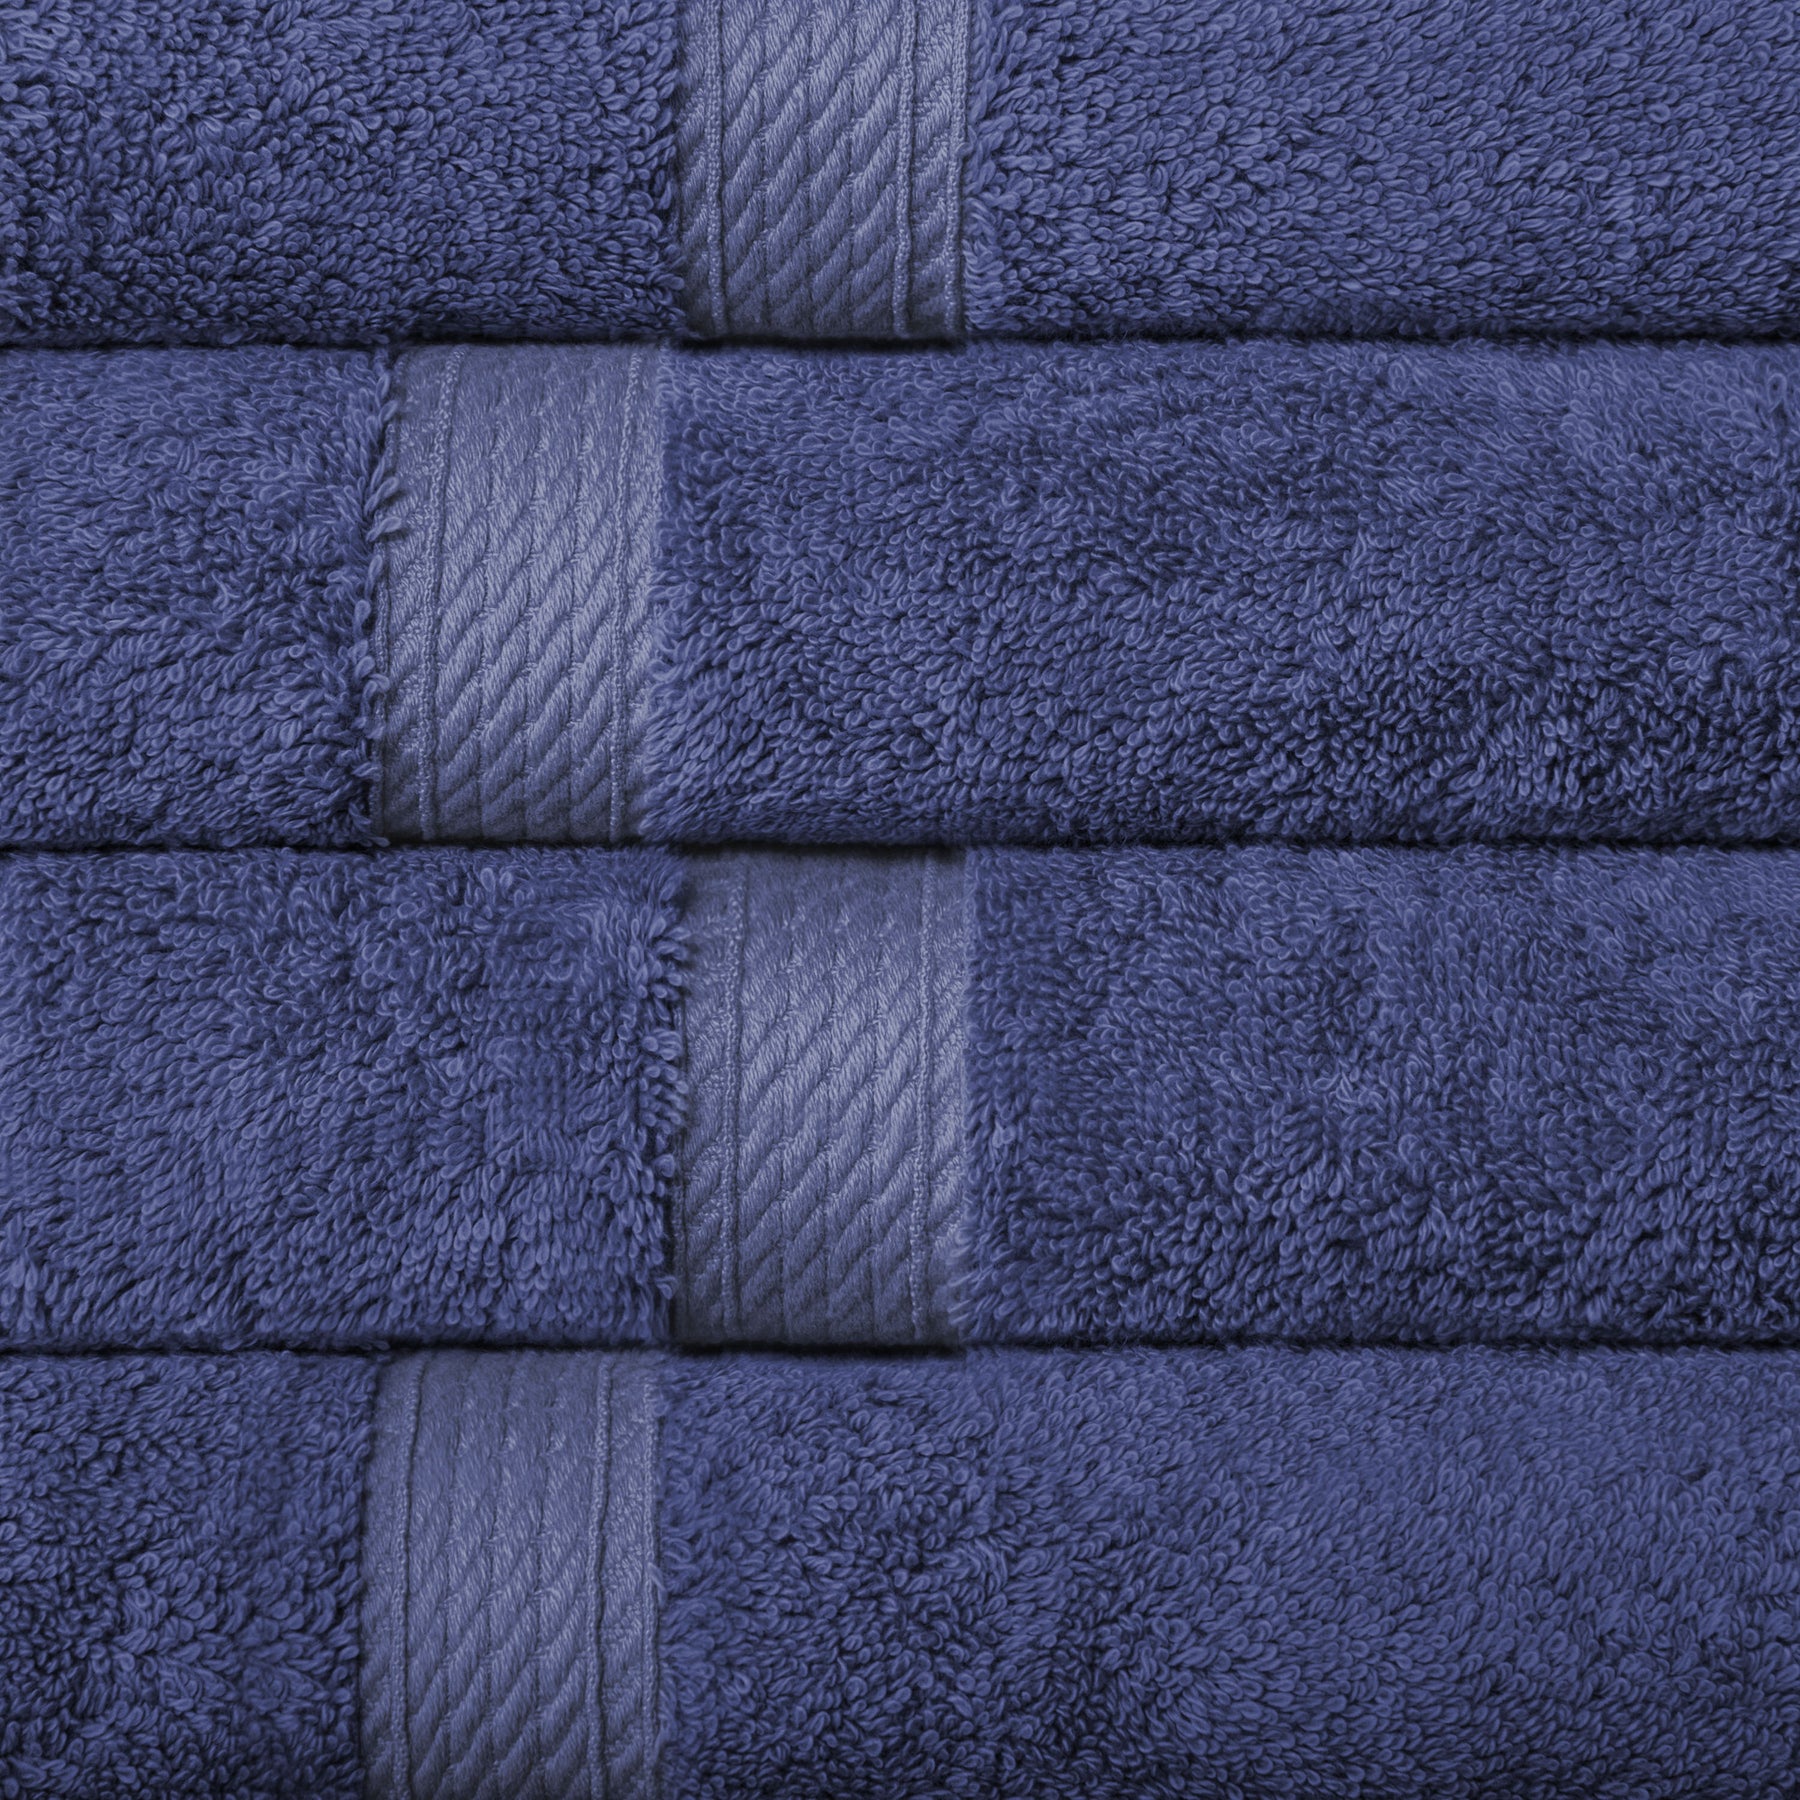 Solid Egyptian Cotton 4 Piece Hand Towel Set - Navy Blue